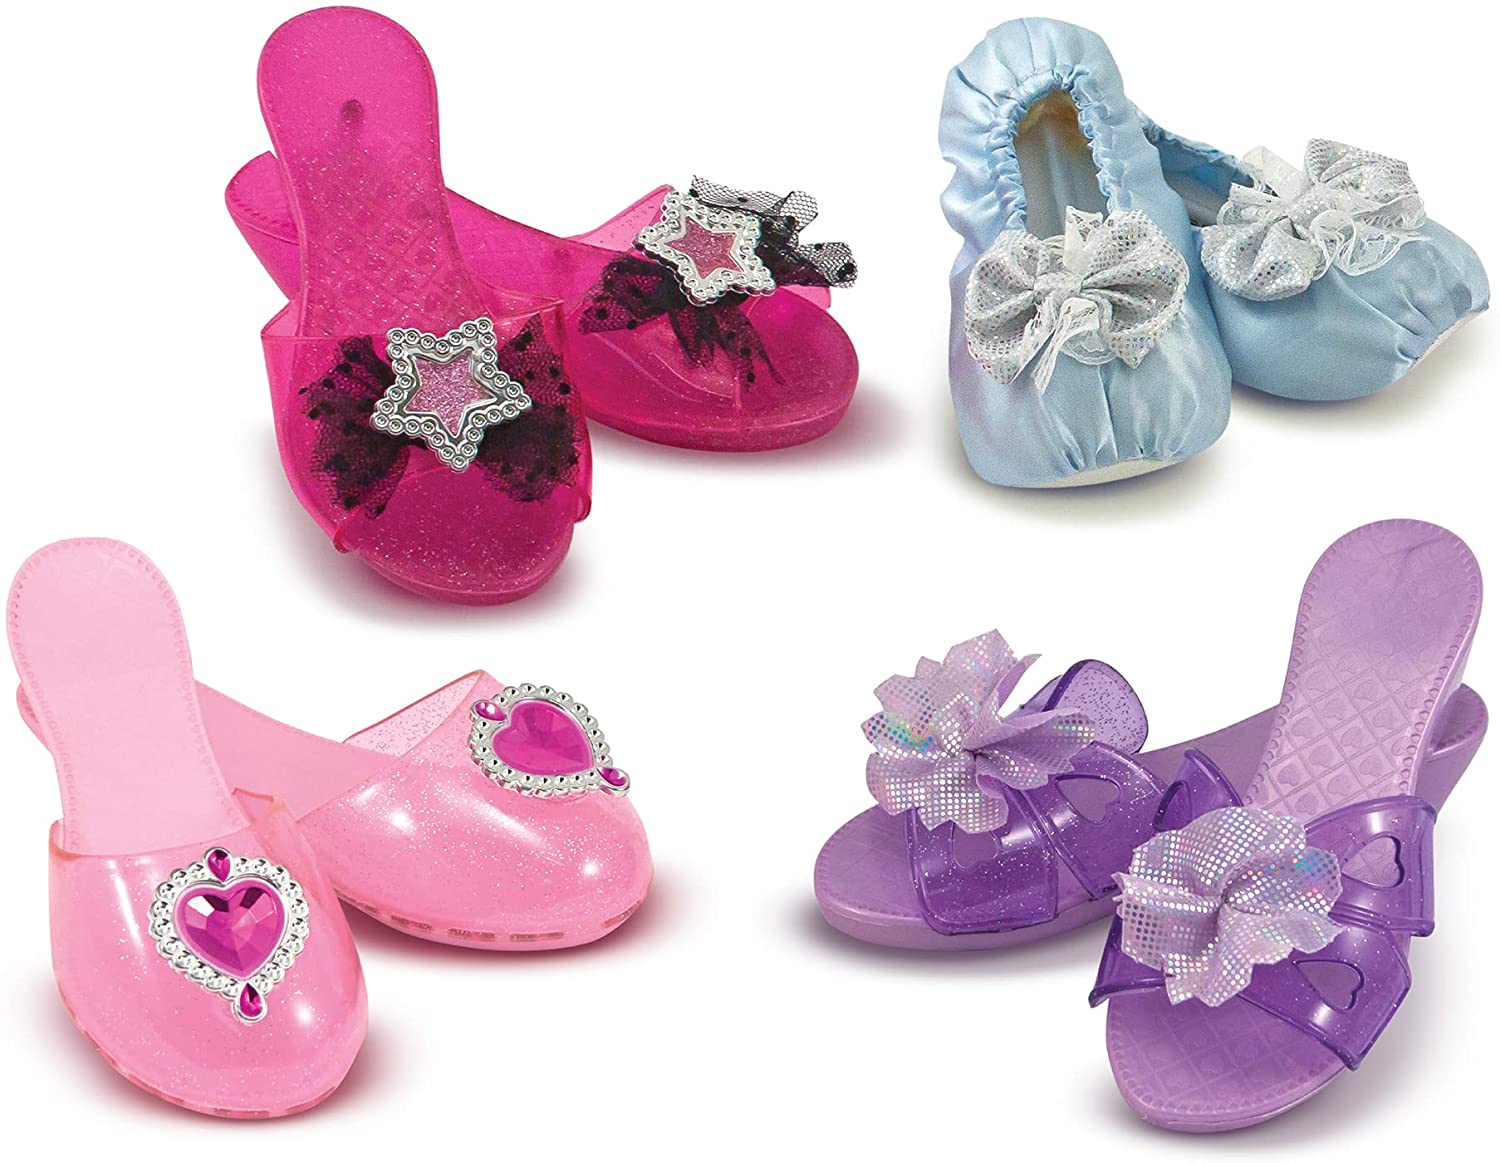 Melissa & Doug Role Play Collection - Step In Style! Dress-Up Shoes Set (4 Pairs) $13.49